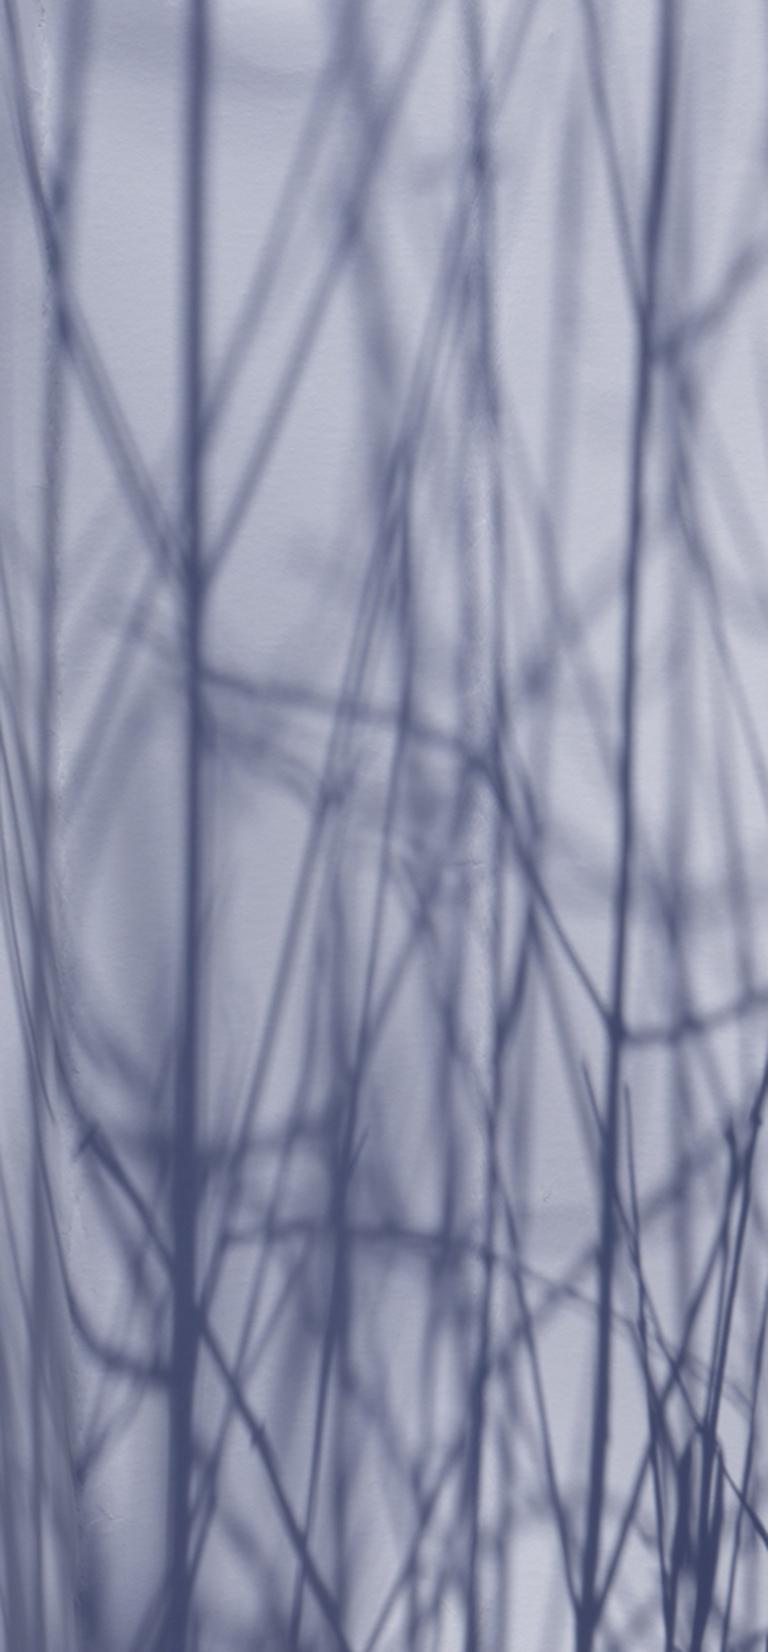 Shadow Legacy no. 10 - Abstract blue & gray geometric snow landscape w/ branches - Photograph by Brenda Biondo